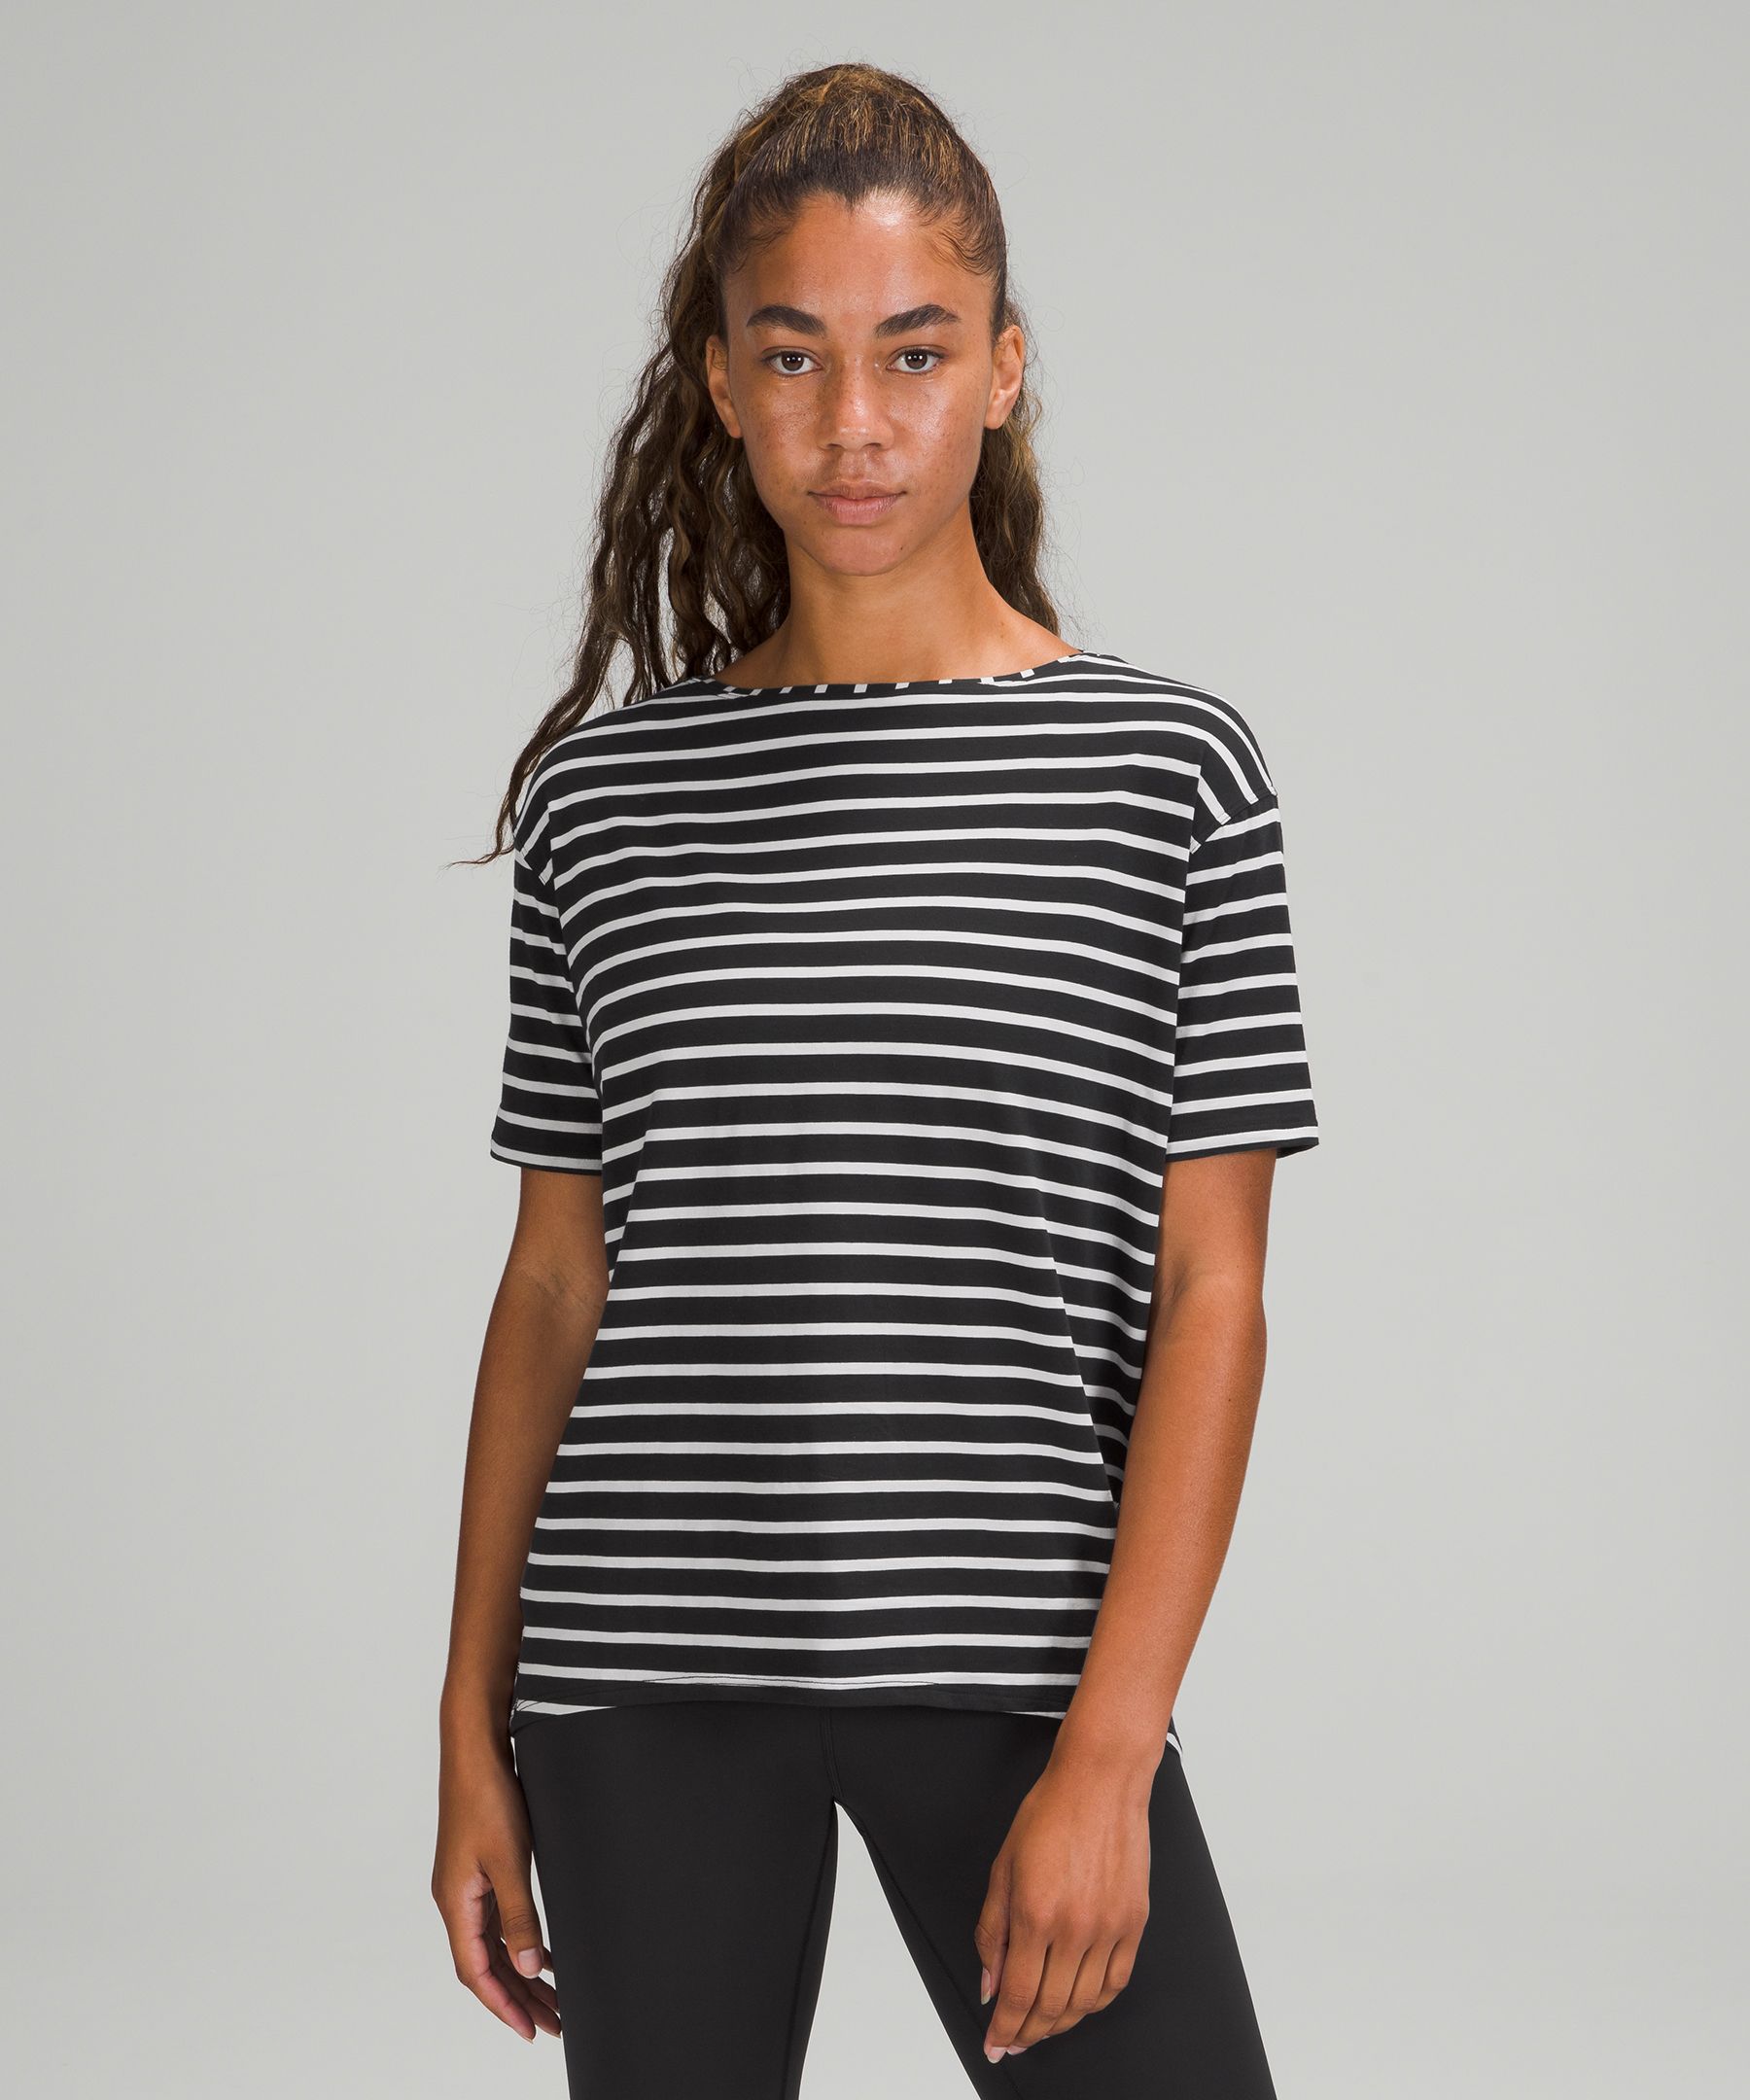 Back In Action Short Sleeve T-shirt In Yachtie Stripe Black Chrome